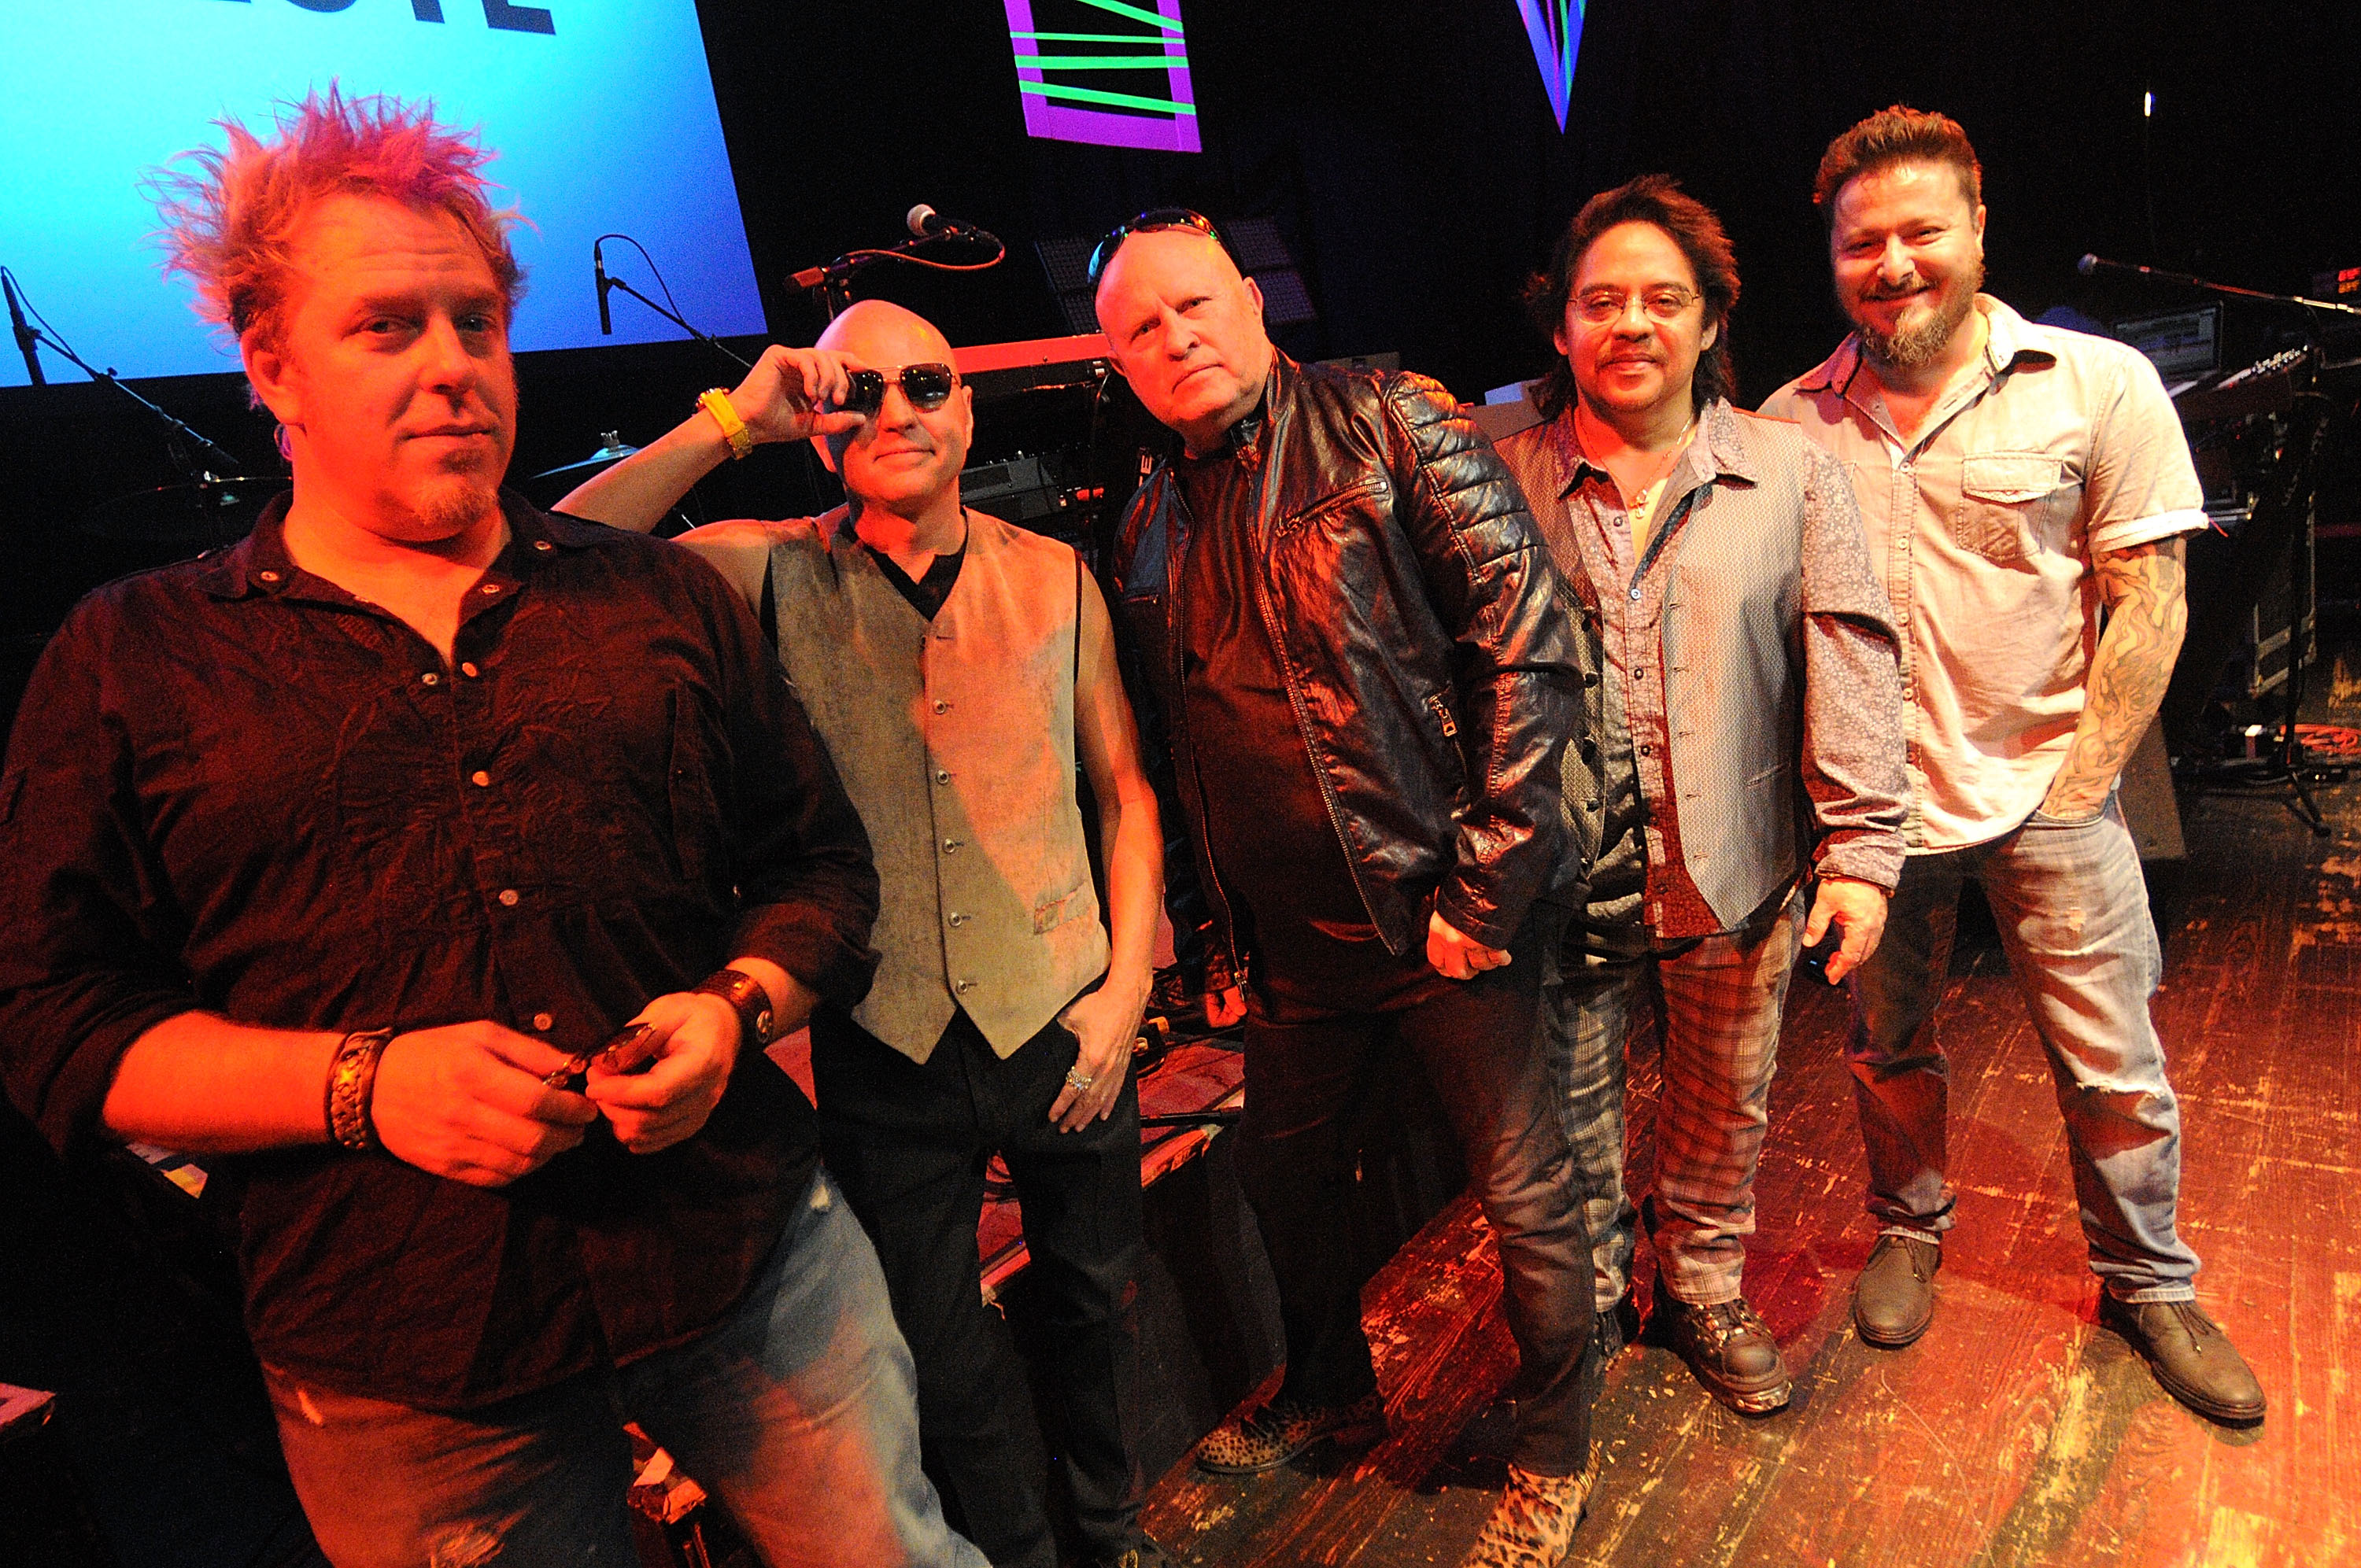 Jimmy D Robinson & Flock of Seagulls at H.O.B. - L to R: Kevin Rankin, Jimmy D Robinson, Mike Score, Joe Rodriguez, Lucio Rubino. (Photo by Gerardo Mora/Getty Images)